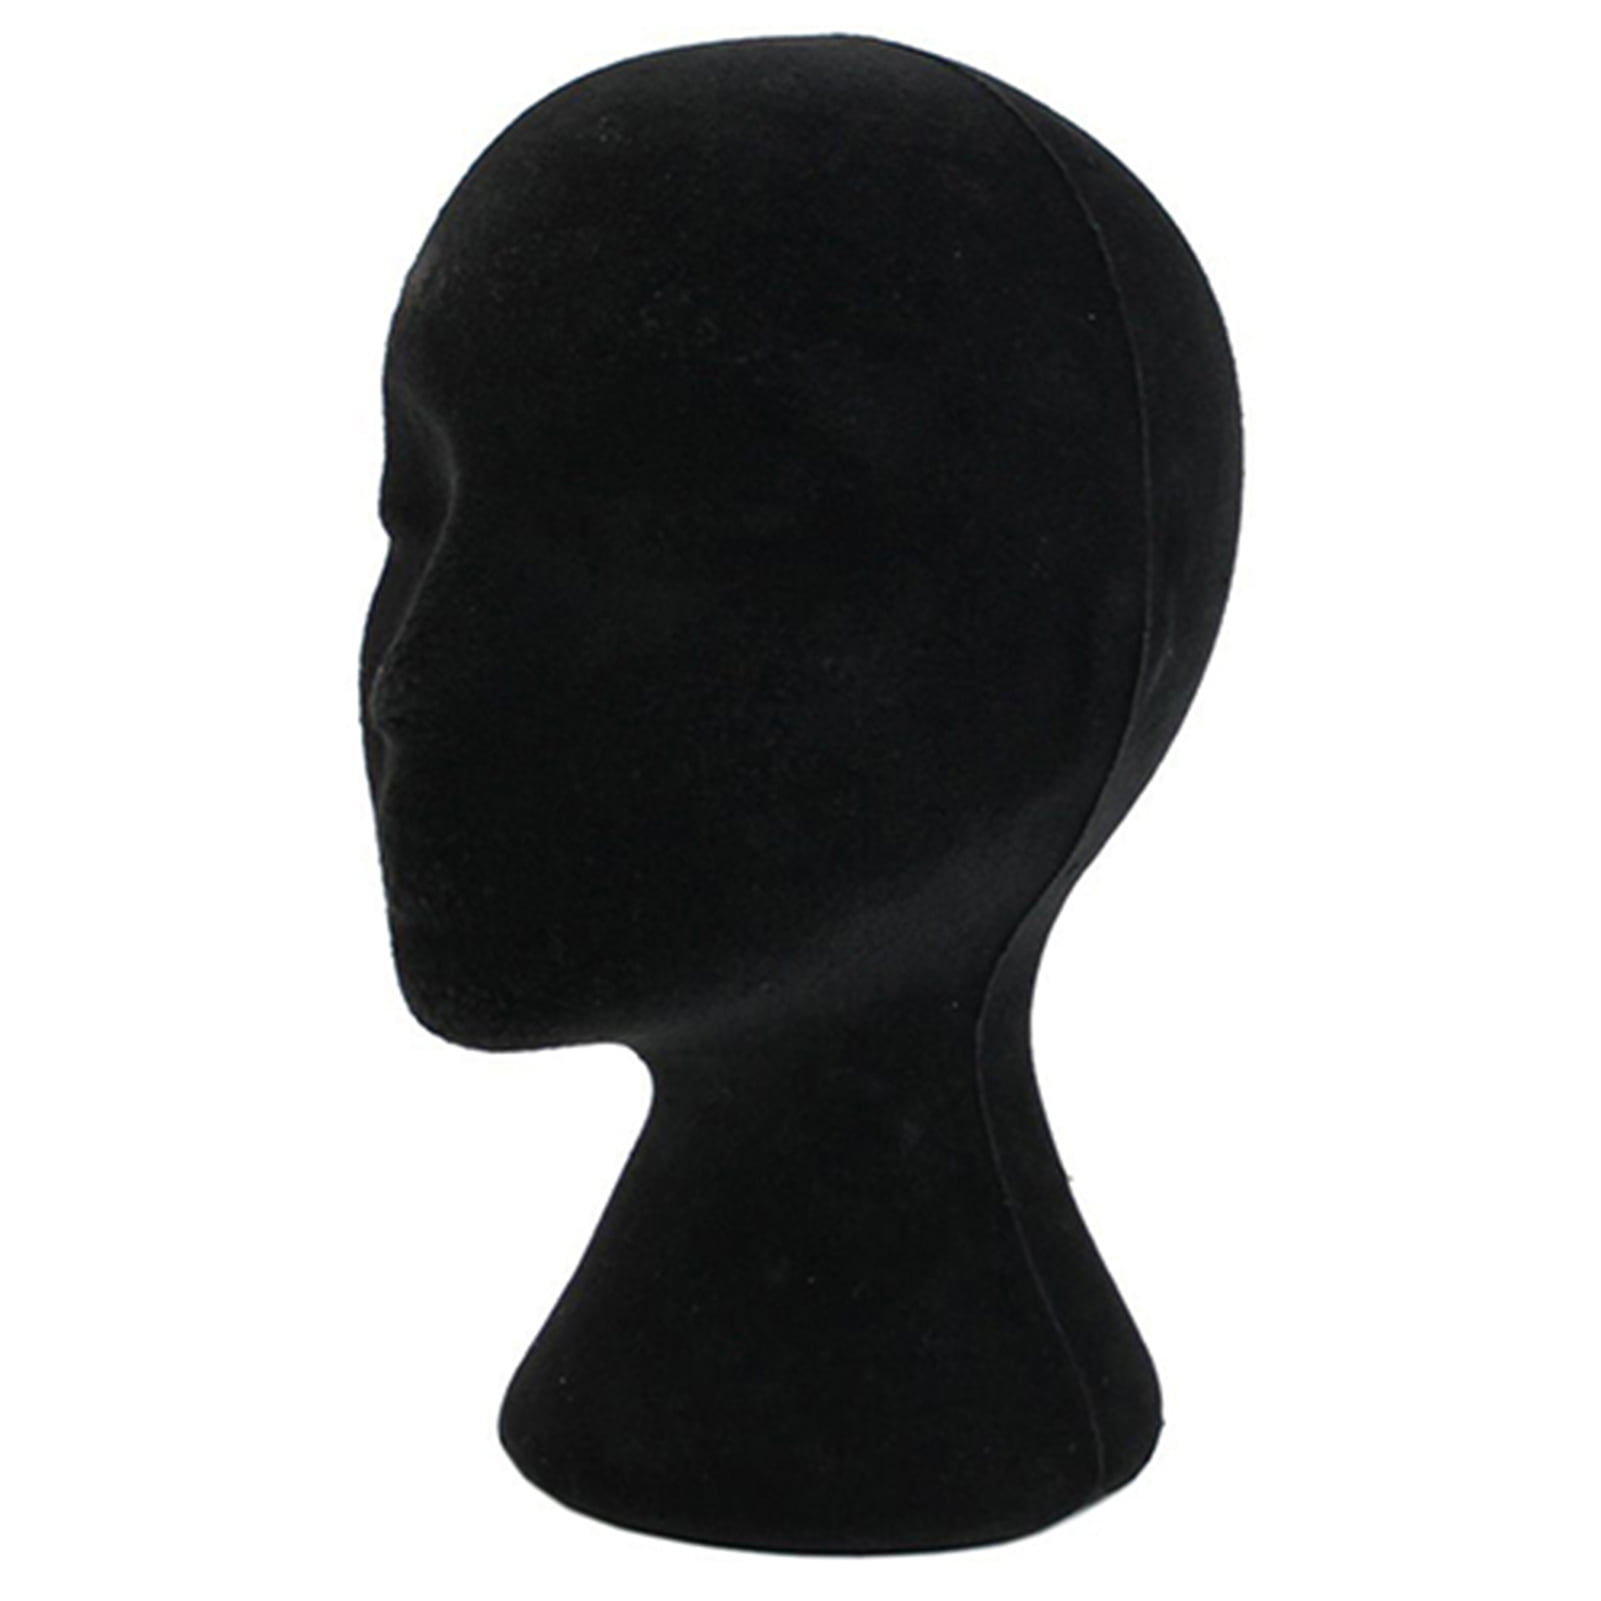 Plussign New Makeup Black Lipstick Model Wig Mannequin Head With Shoulders  Breast Ear Holes Headband Sunglasses Display Stand